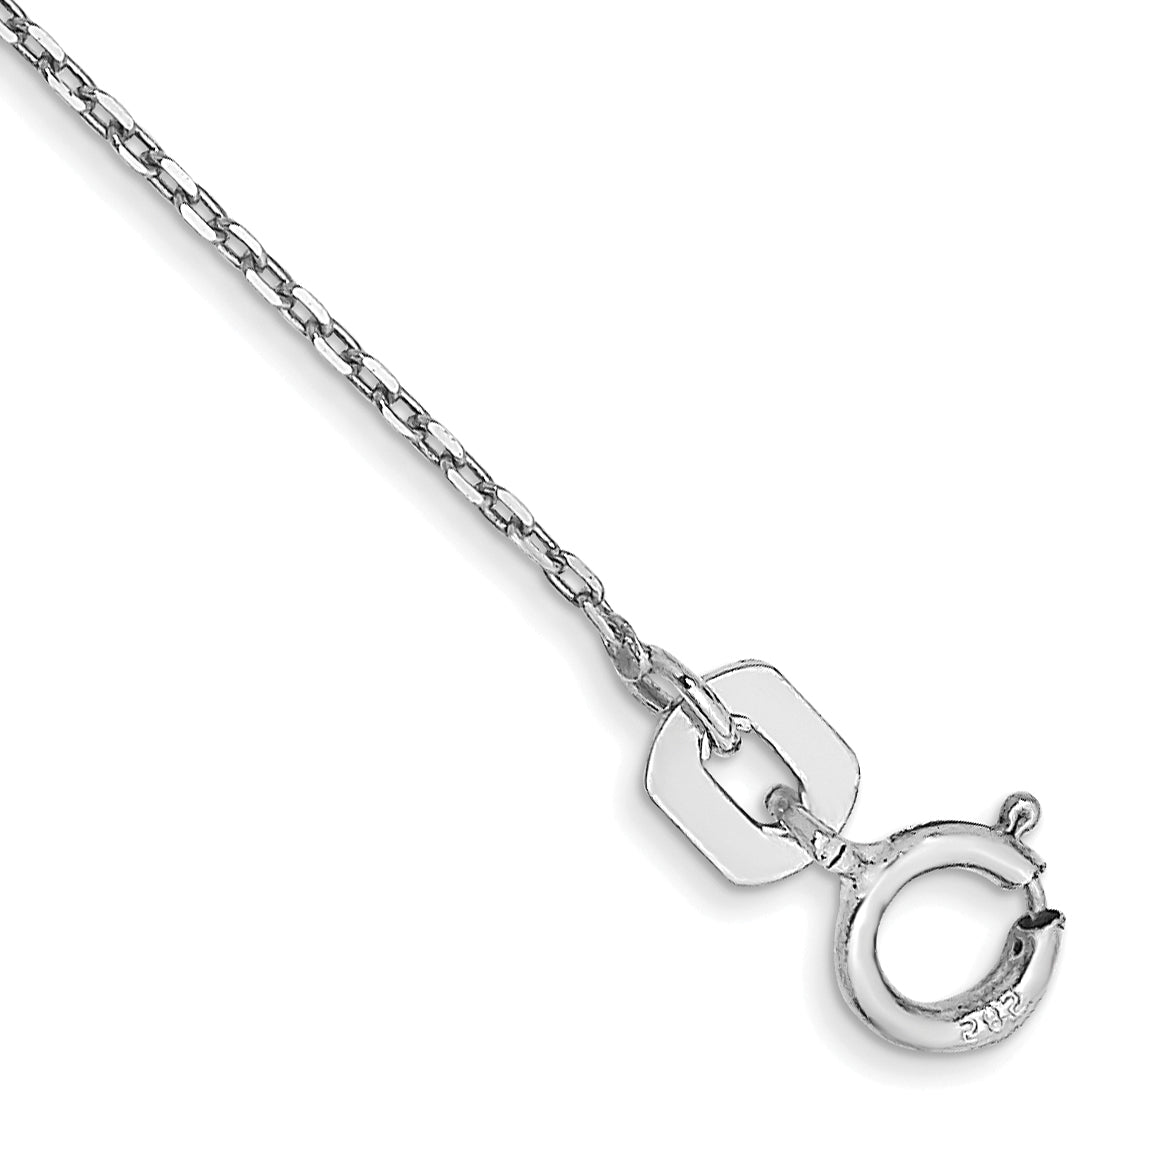 10k WG .8mm D/C Cable with Spring Ring Clasp Chain Anklet